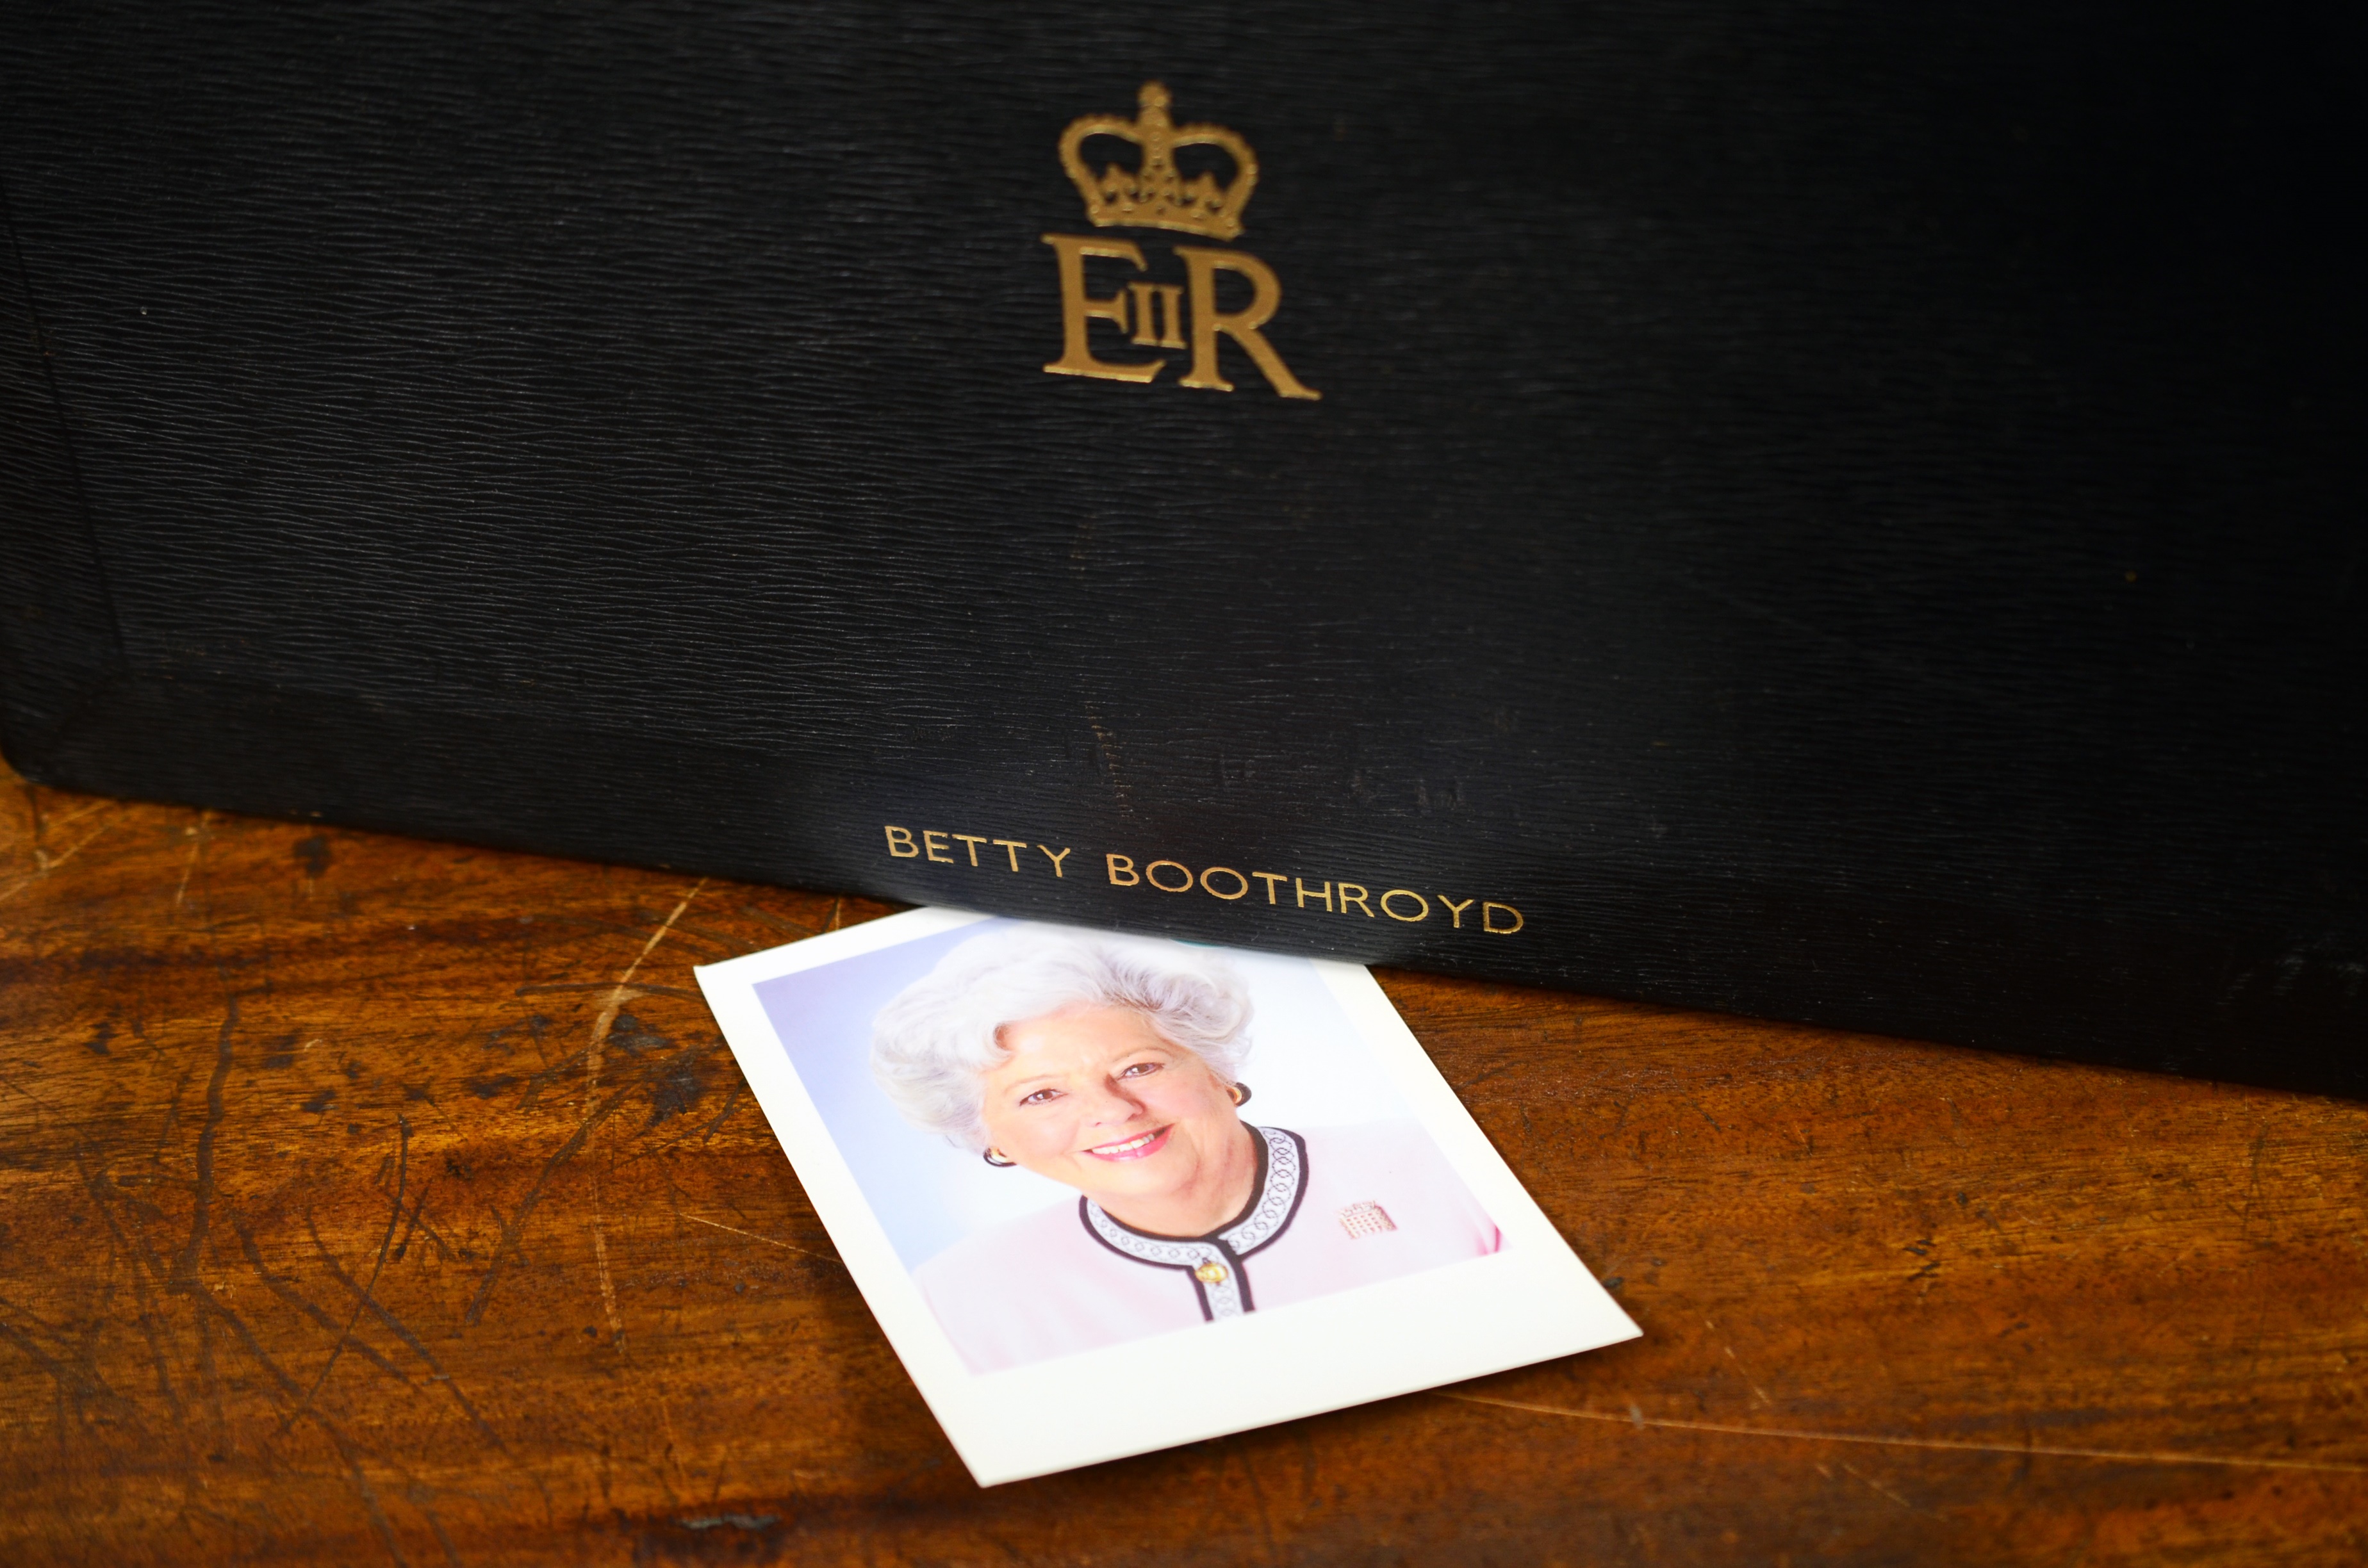 The Estate of the late Baroness Betty Boothroyd OM